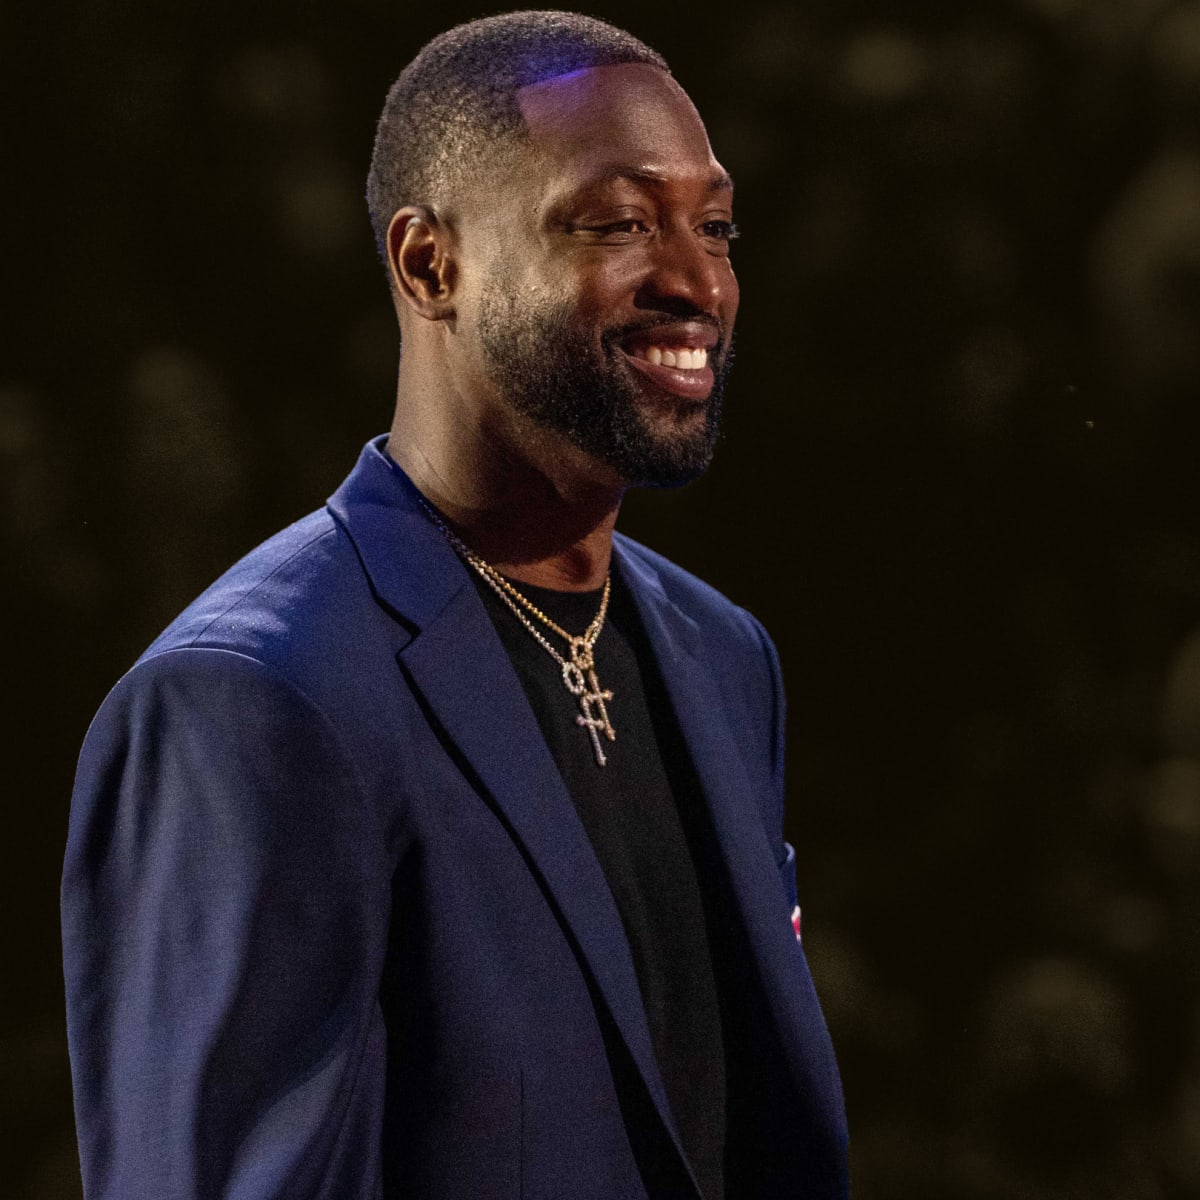 Dwyane Wade responds to the accusations from his ex-wife that he is trying to profit from his transgender daughter Zaya Wade - Basketball Network